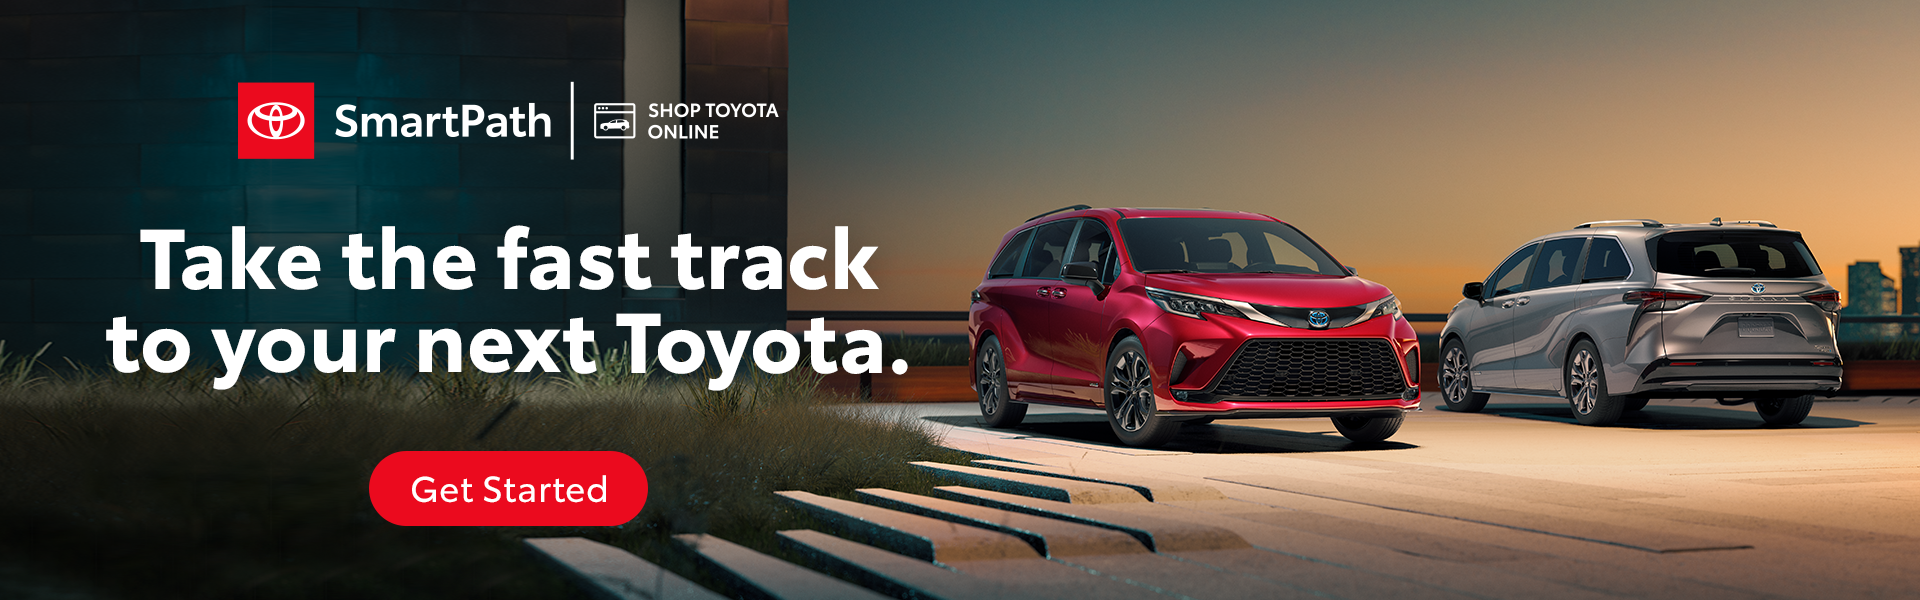 SmartPath - Take the Fast Track to your next Toyota.